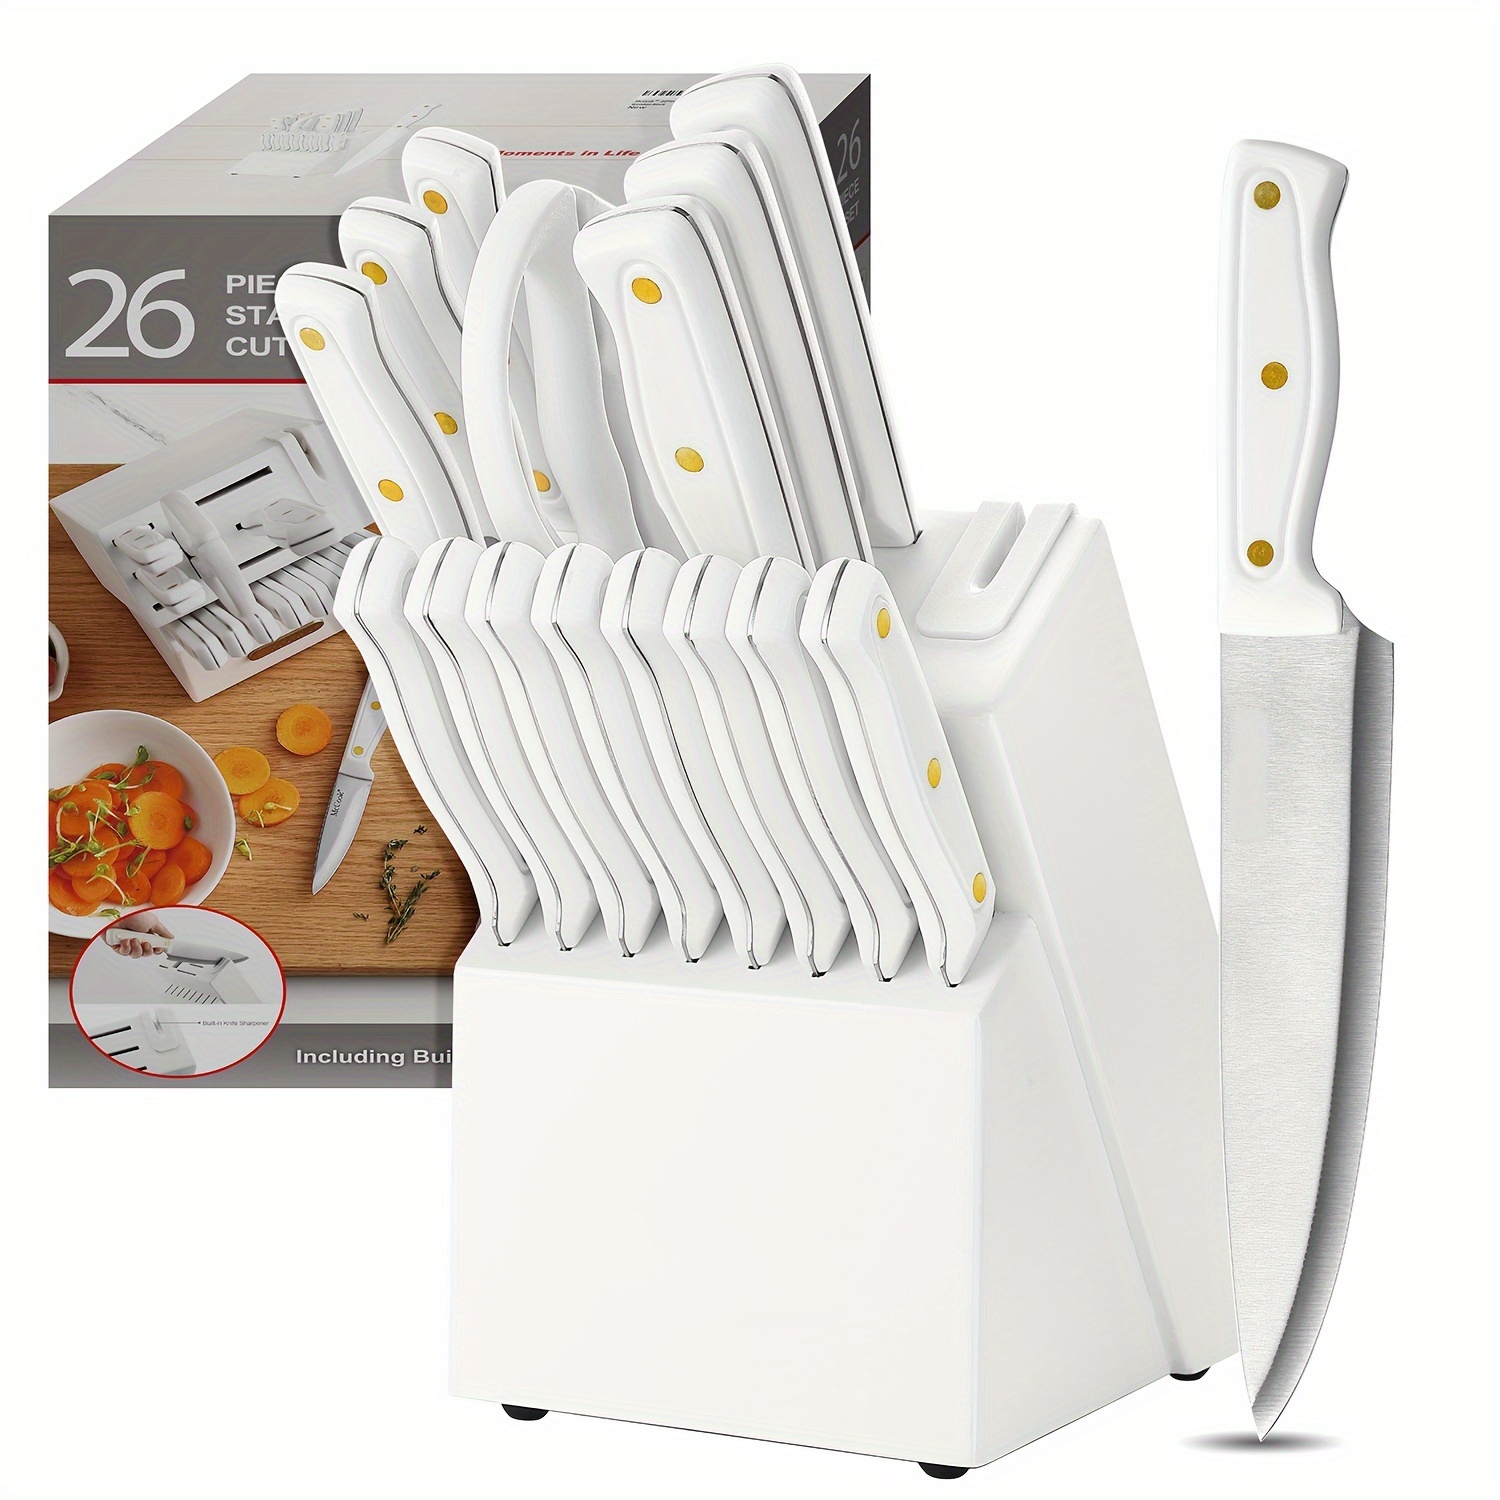 

Knife Set For Kitchen With Block, Tec703 White Kitchen With Built-in Sharpener, Cutlery Set With Measuring Cups And Spoons For Cooking, 26pcs